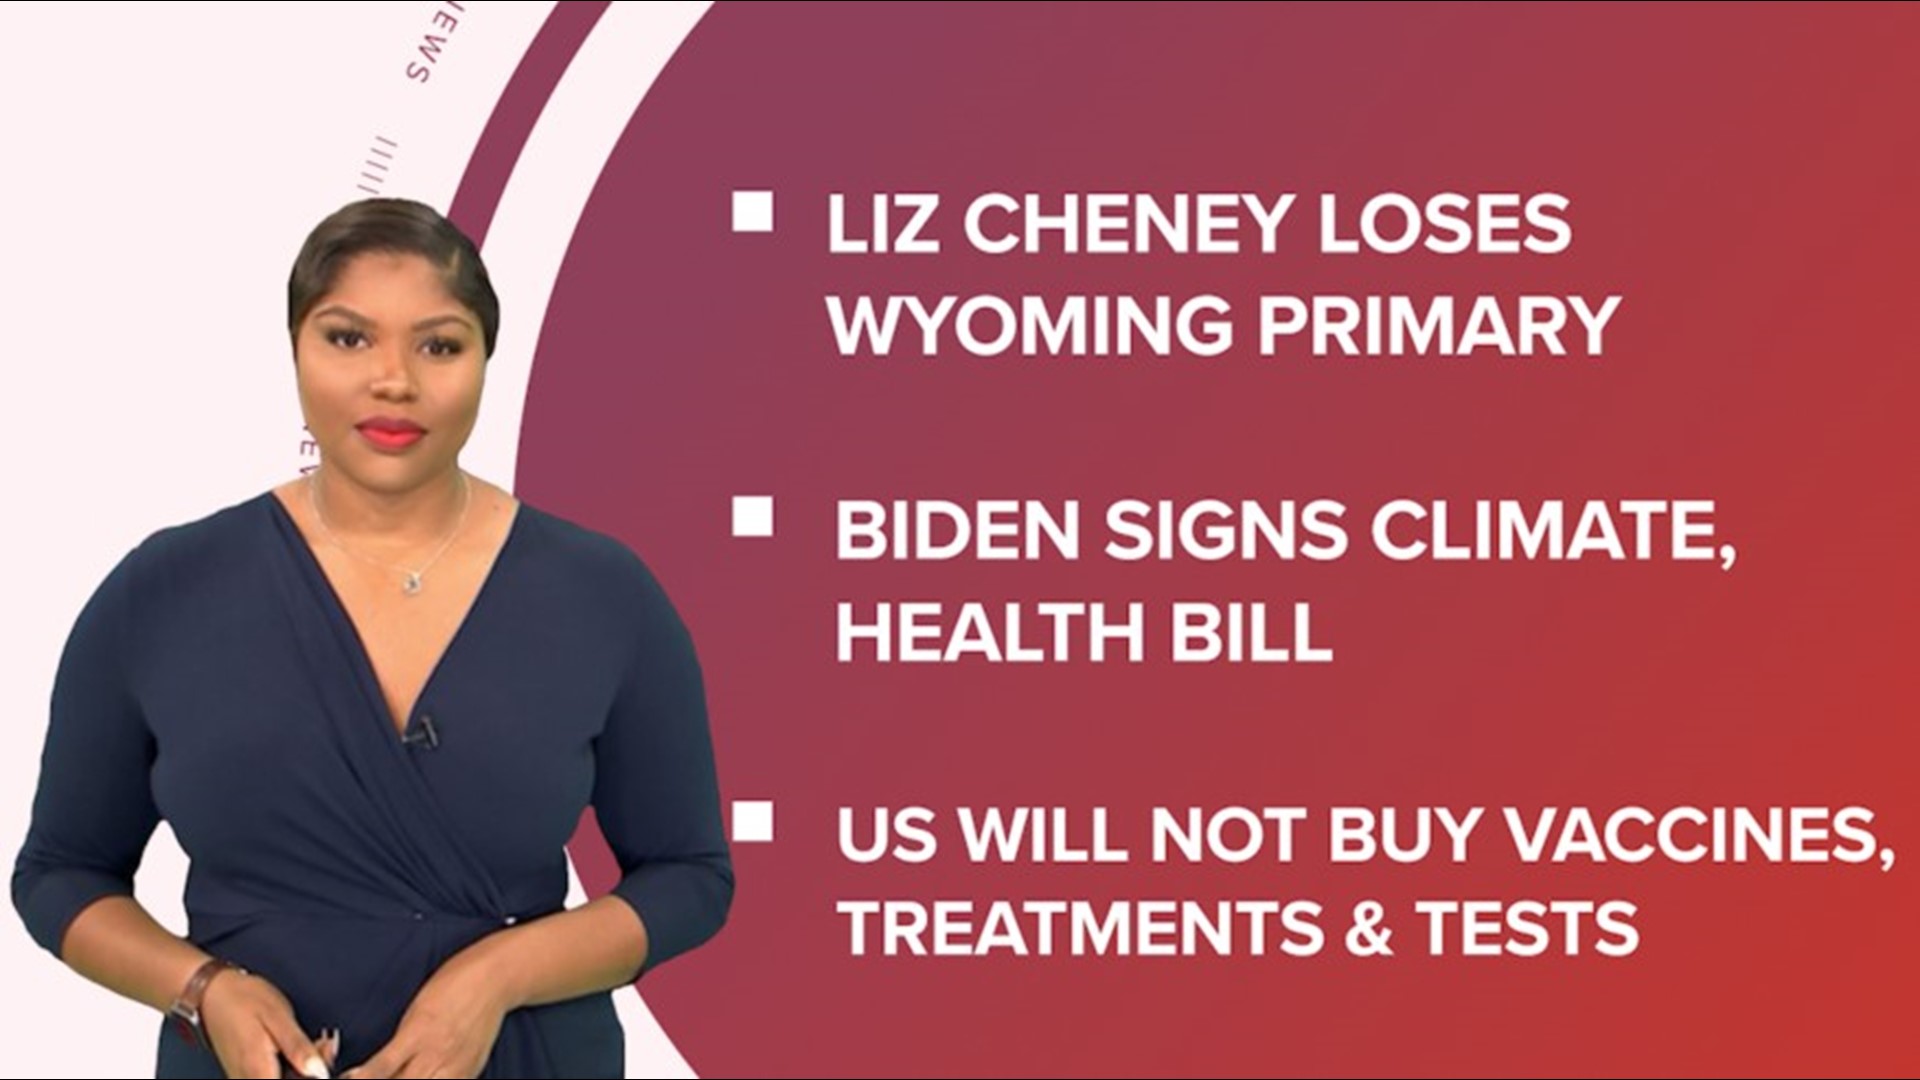 A look at what is happening in the US from Pres. Biden signing the Inflation Reduction Act to Rep. Liz Cheney losing the WY primary and no NBA games on election day.